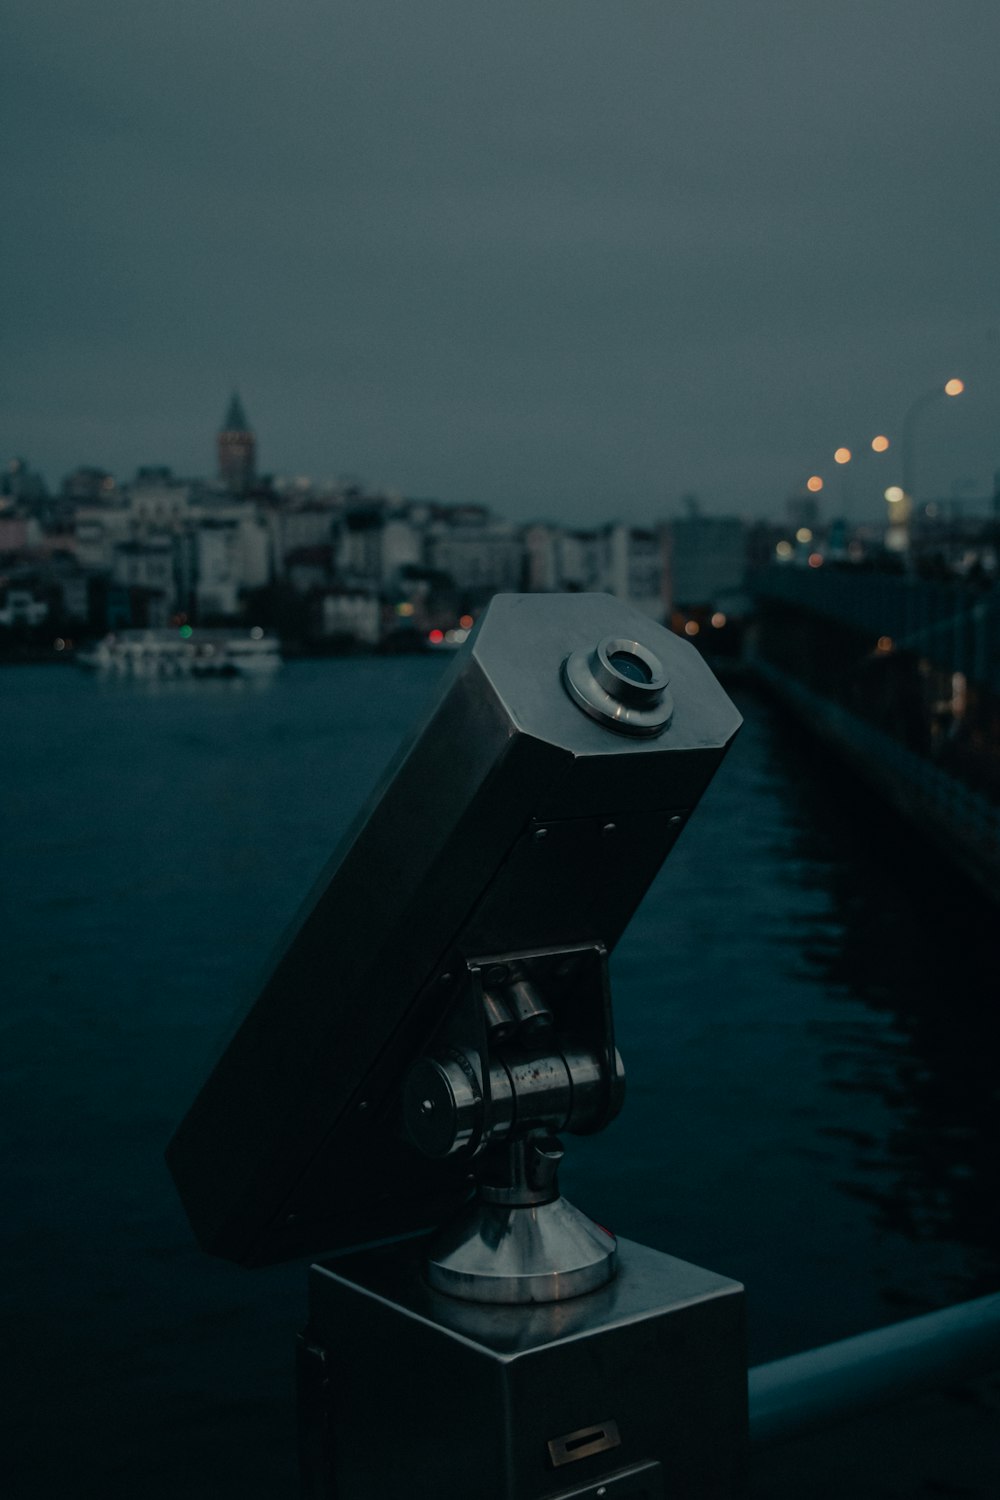 black telescope in front of city buildings during night time